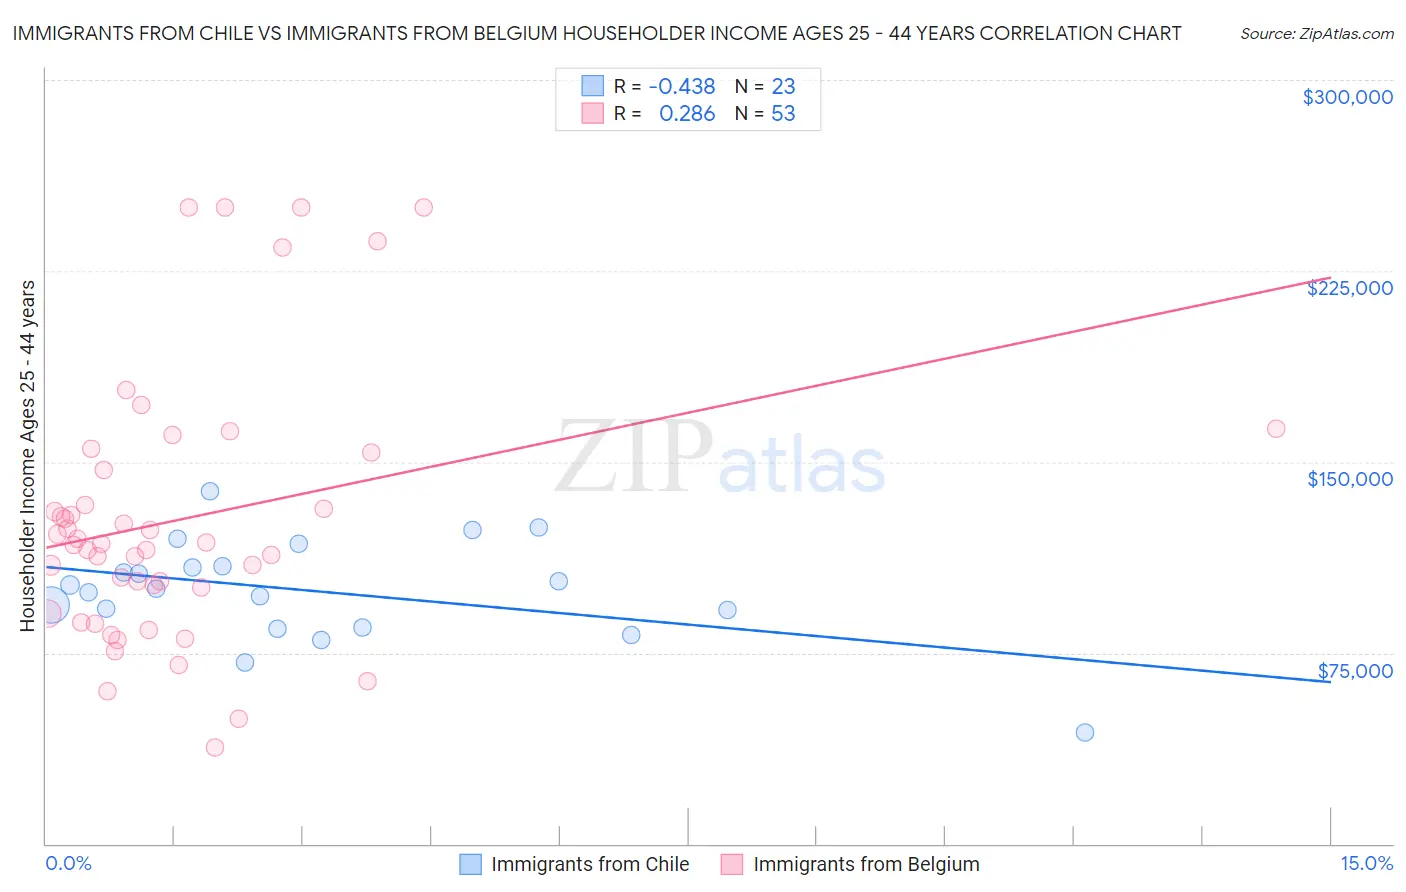 Immigrants from Chile vs Immigrants from Belgium Householder Income Ages 25 - 44 years